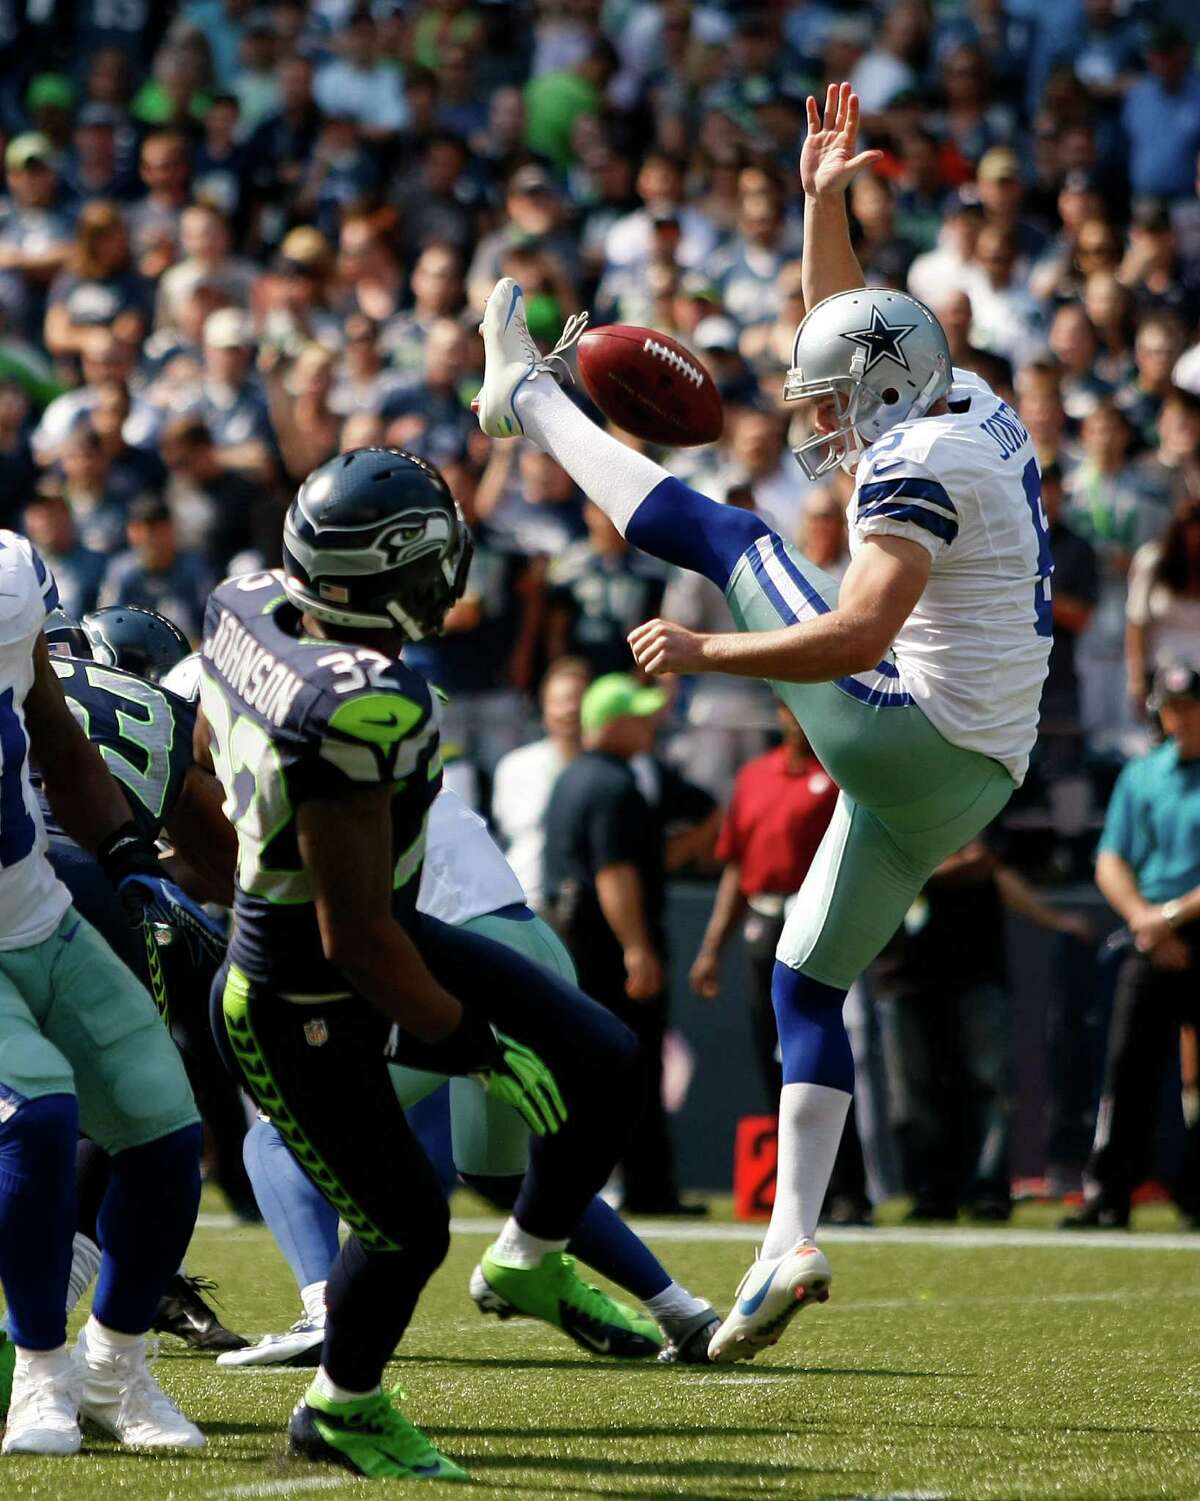 Dallas Cowboys' Chris Jones, right, has his punt blocked as Seattle Seahawks' Jeron Johnson moves in to grab it and run it in for a touchdown in the first half of an NFL football game on Sunday, Sept. 16, 2012, in Seattle. (AP Photo/John Froschauer)